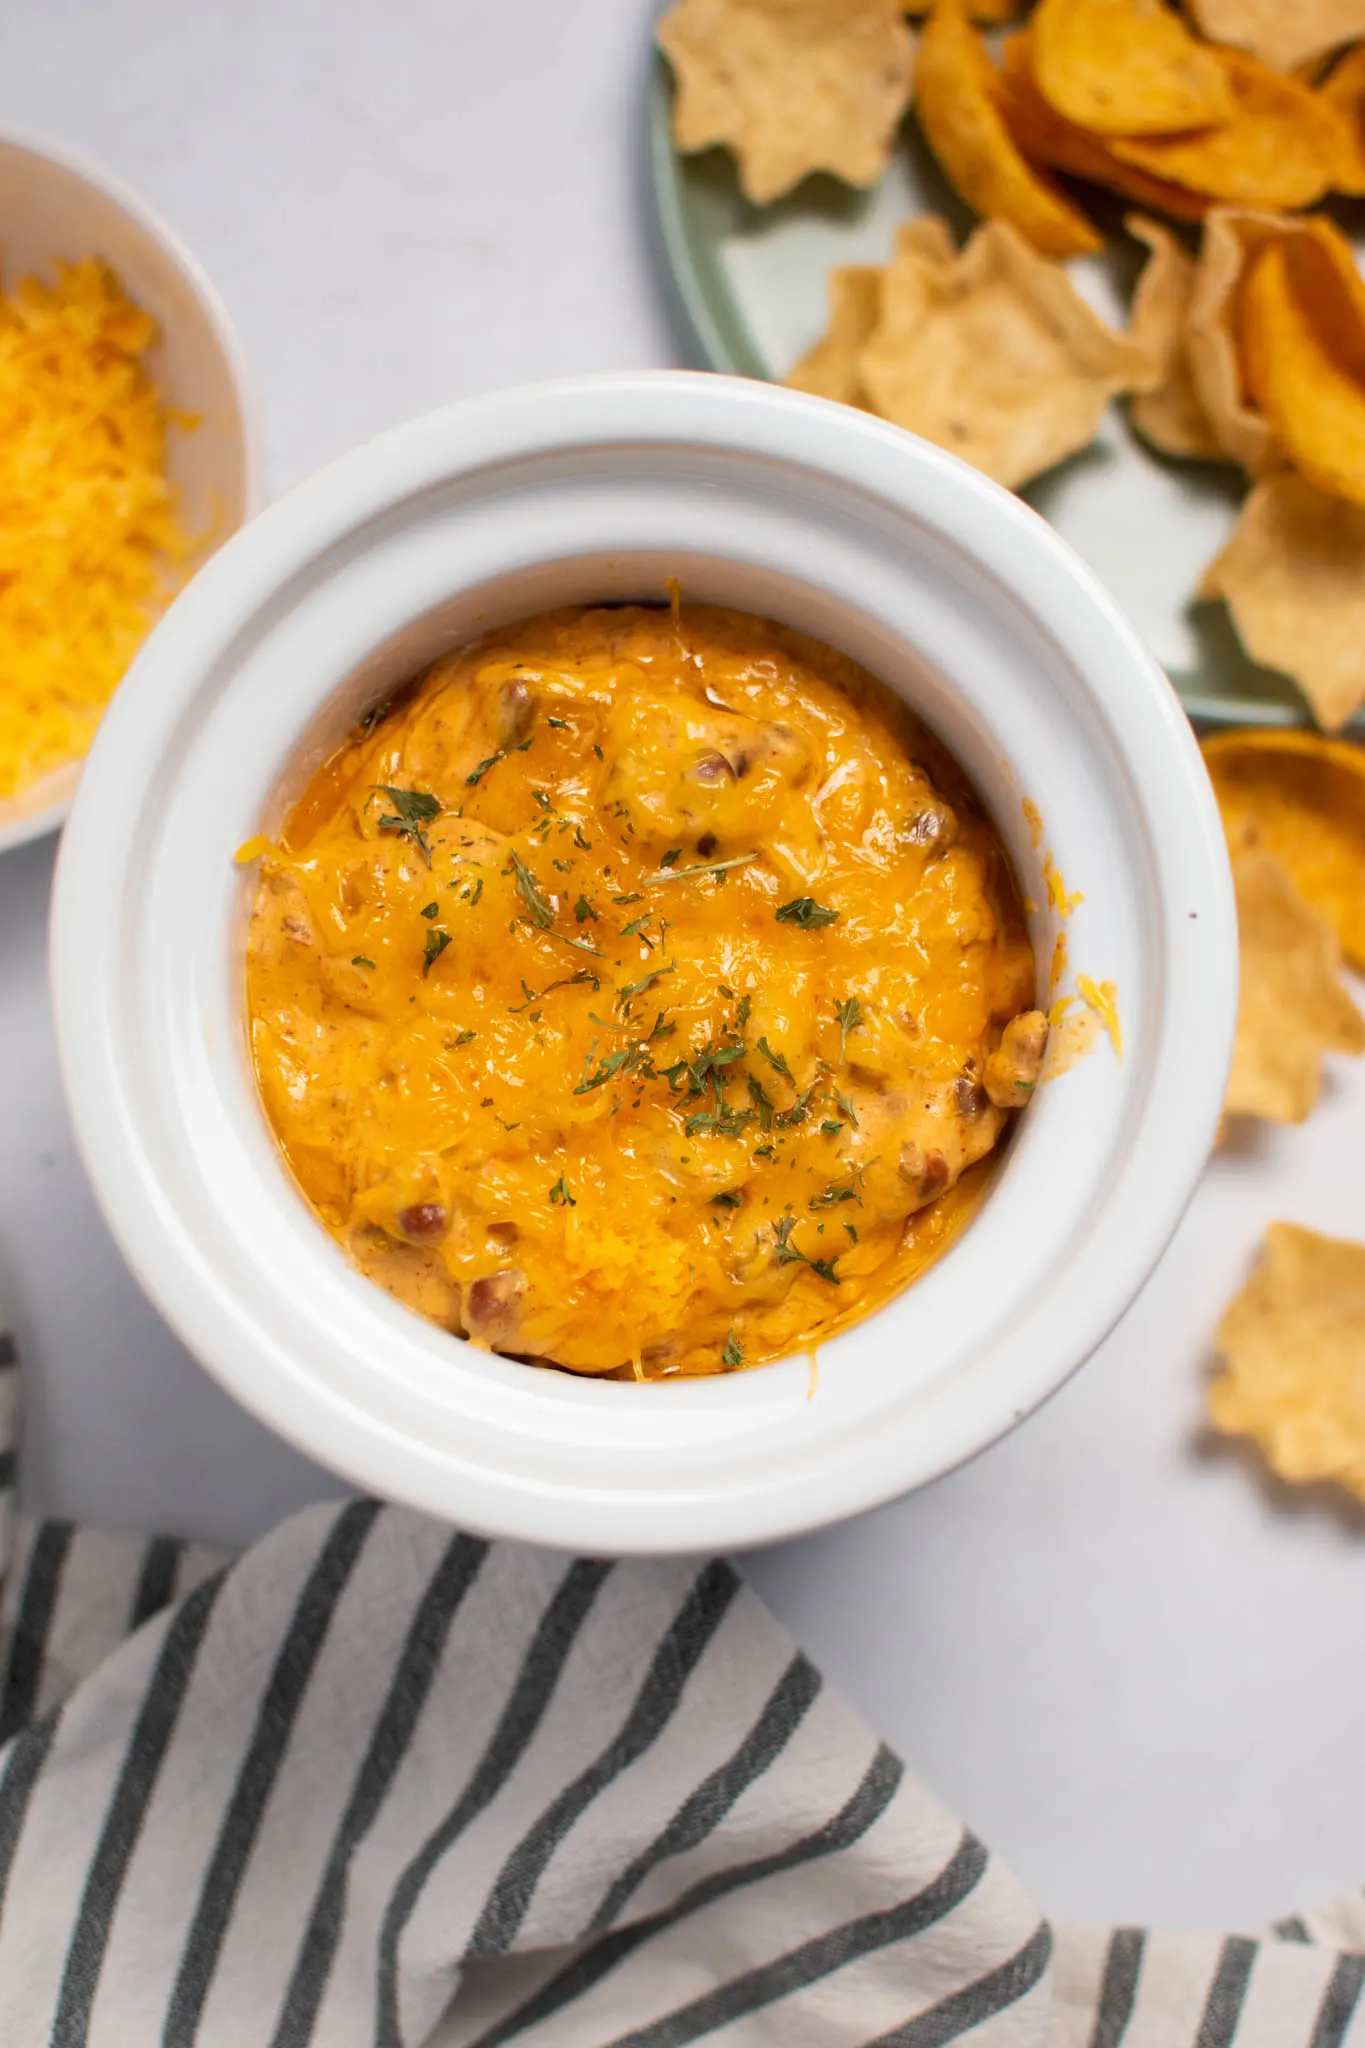 Chili cream cheese dip in small Crock Pot with tortilla chips and striped towel nearby.